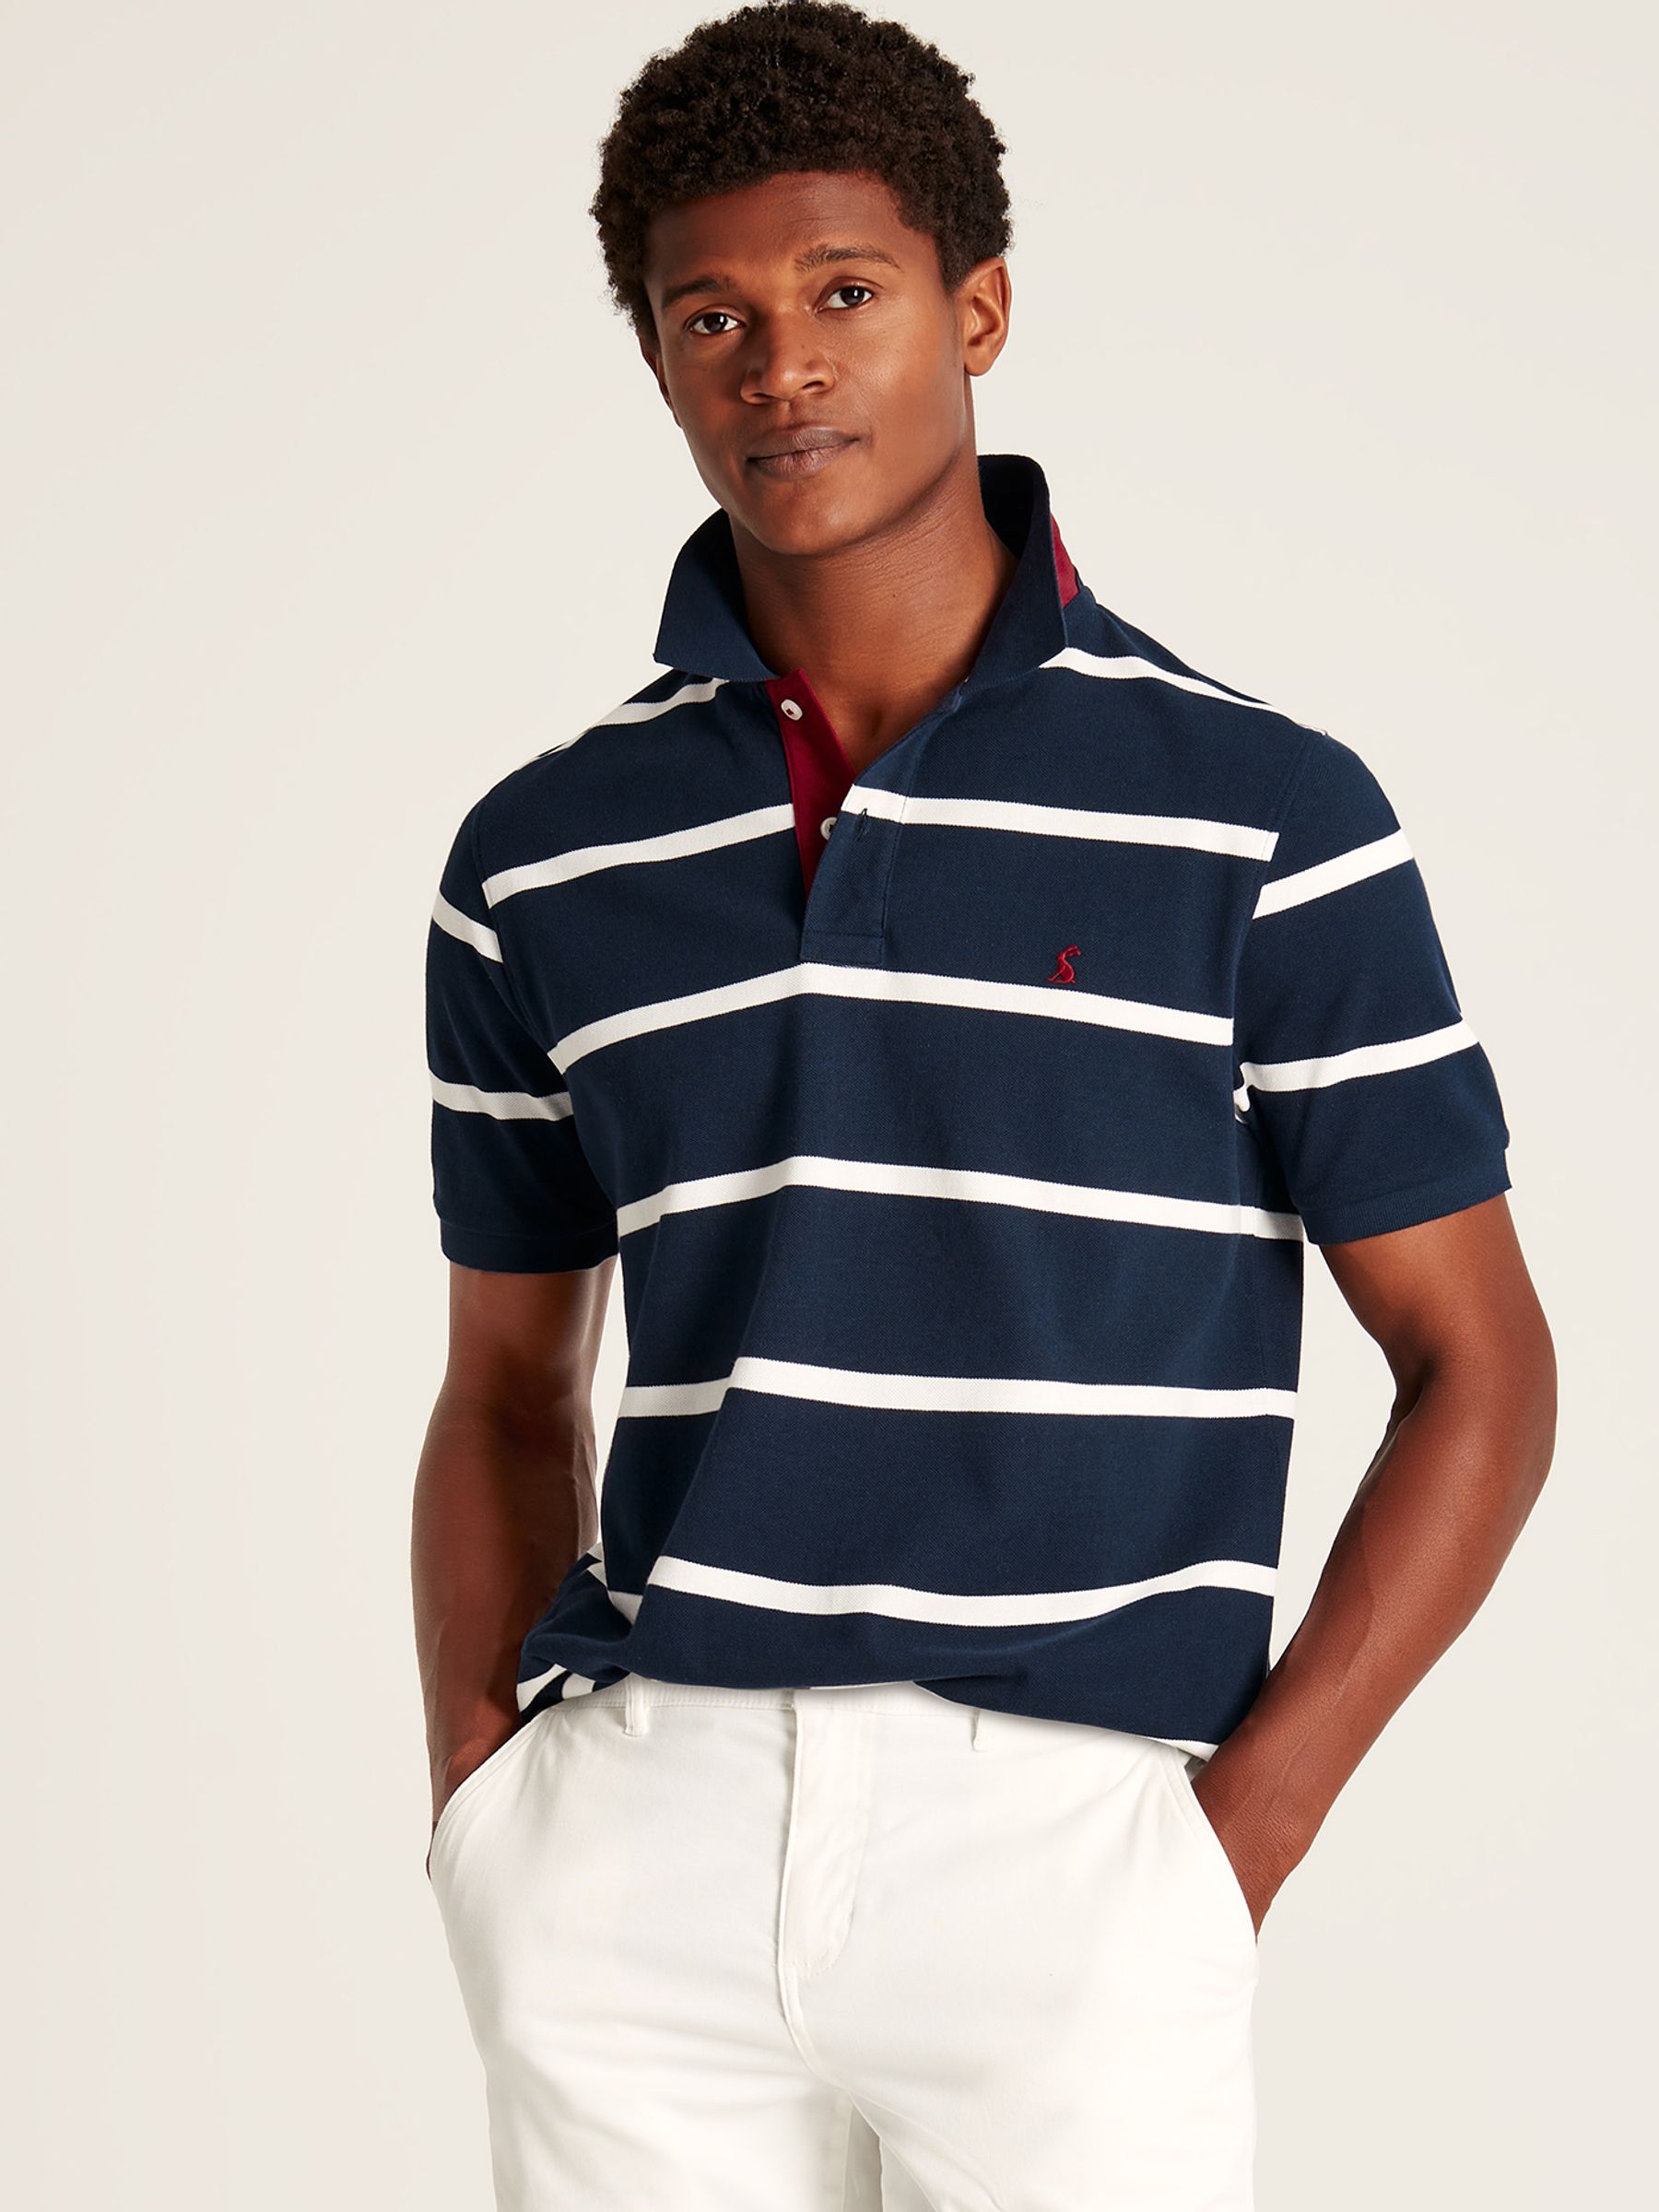 Buy Joules Filbert Classic Fit Striped Polo Shirt from the Joules ...